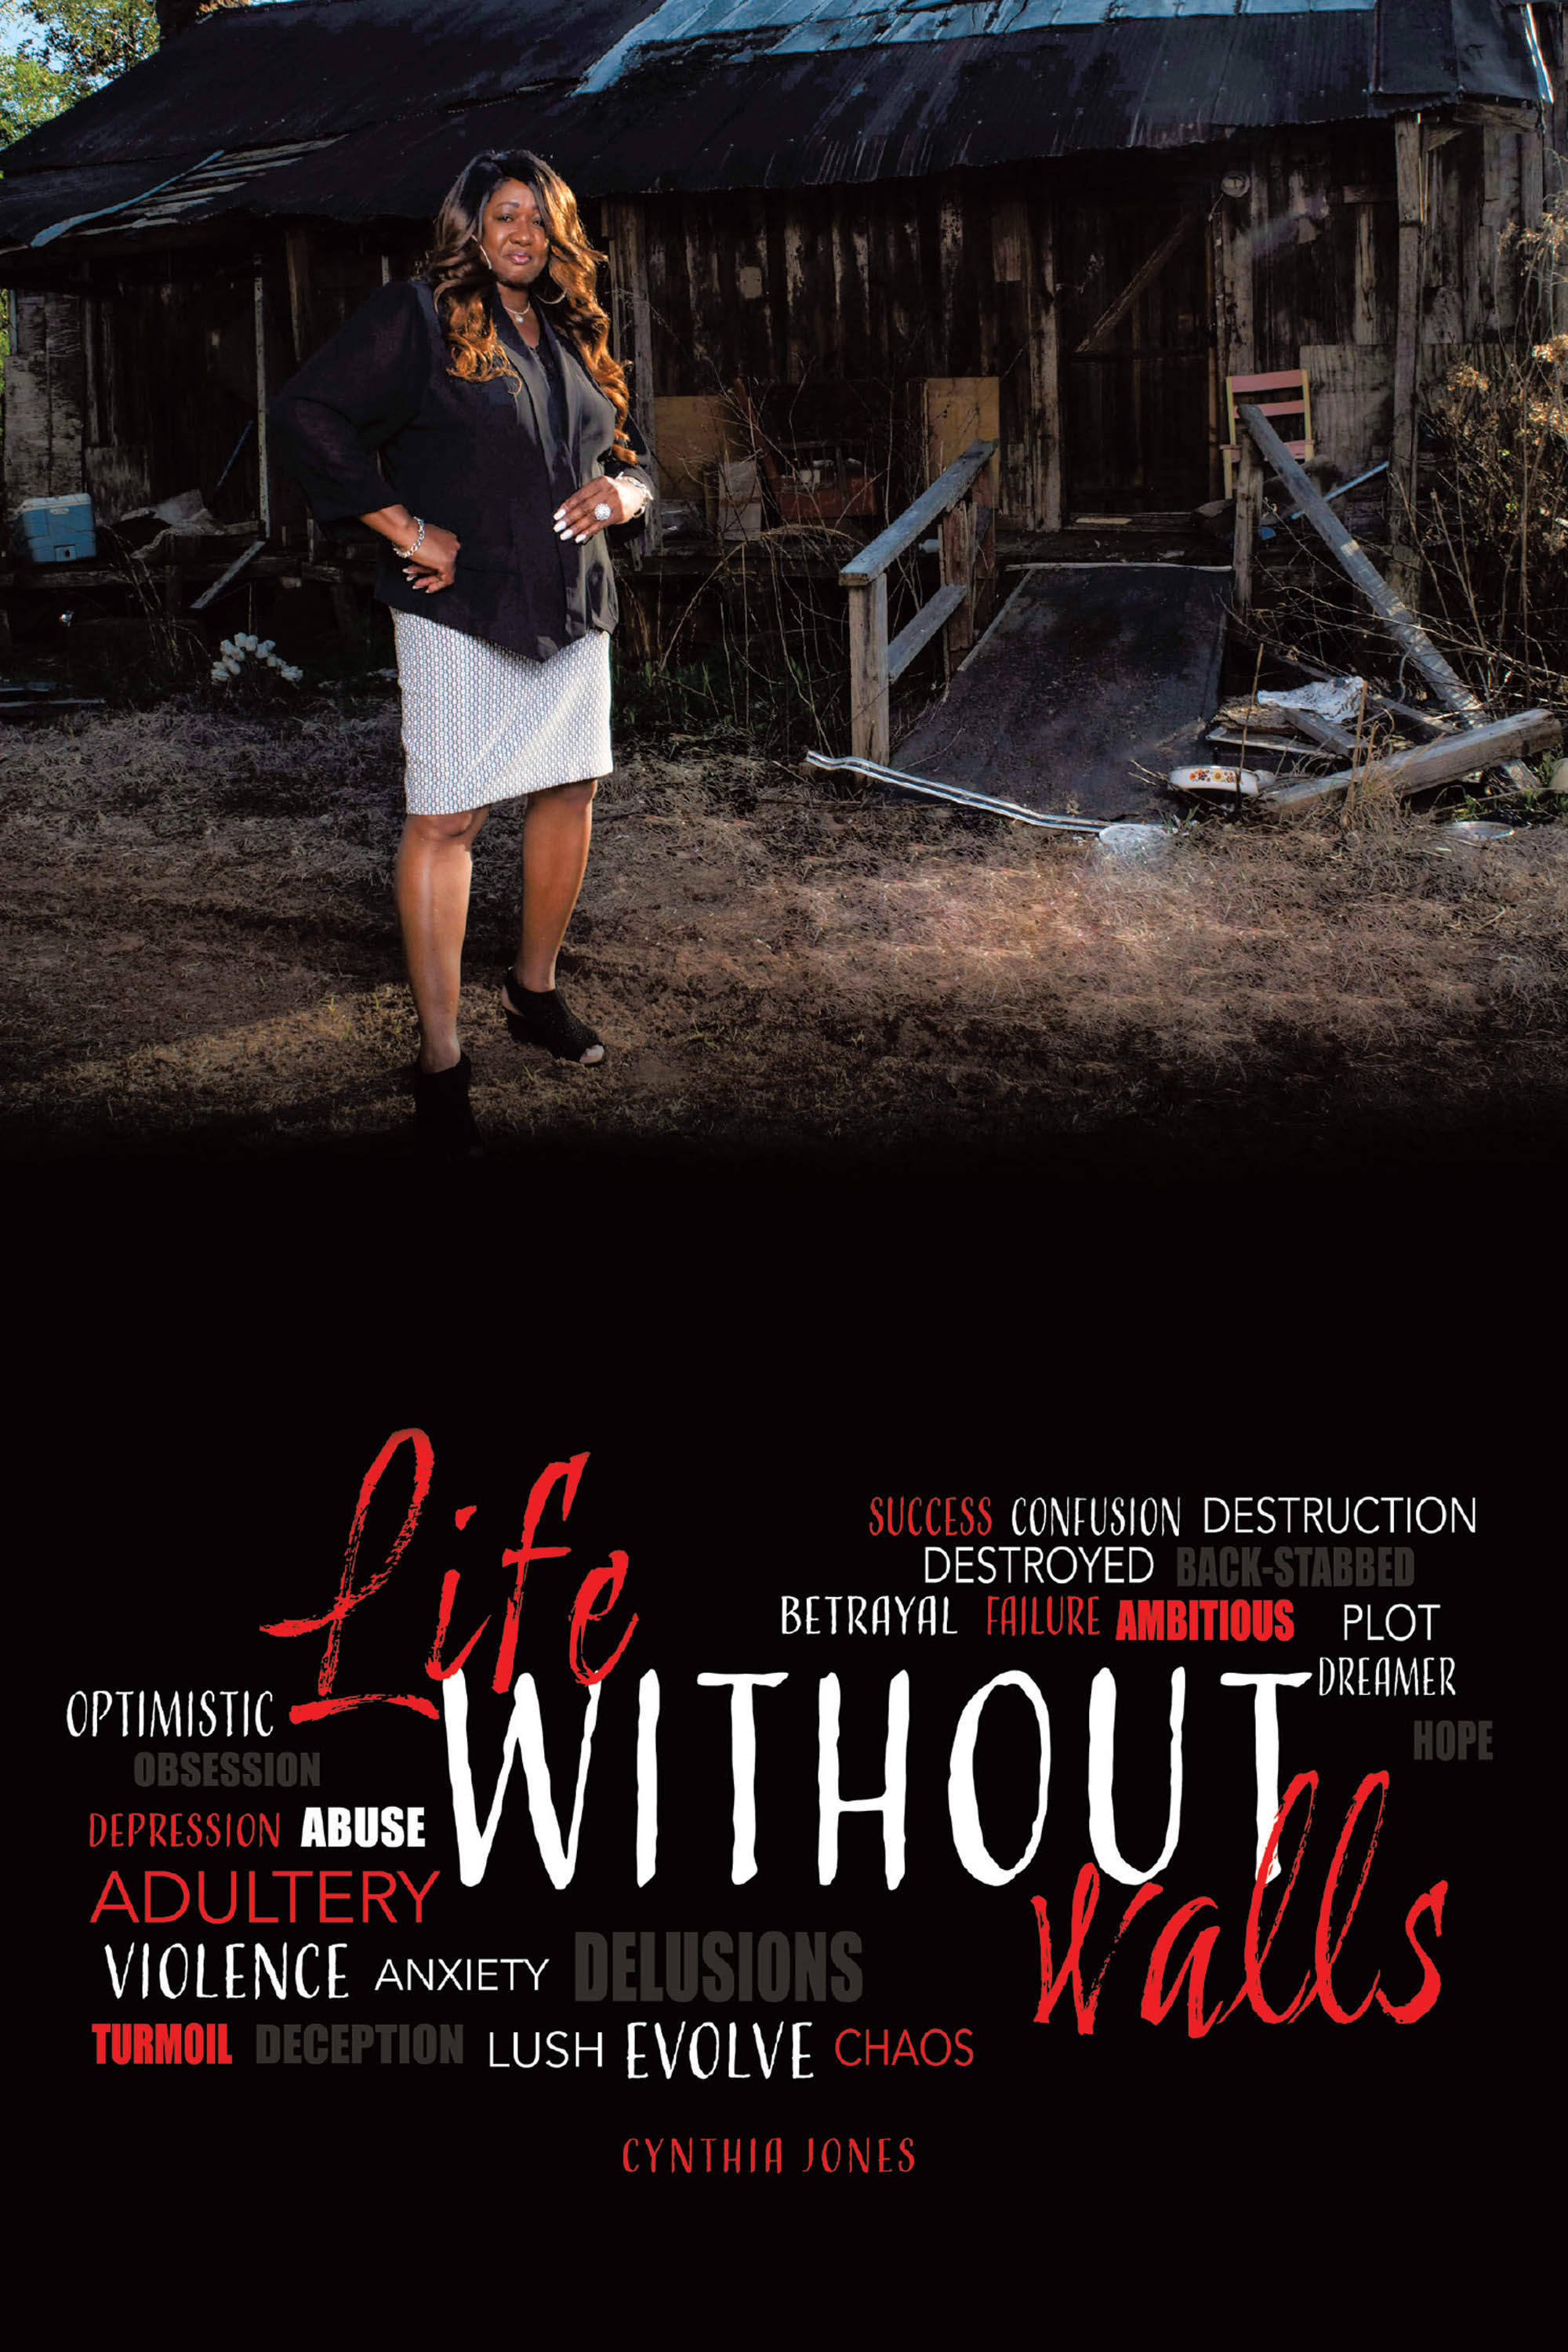 Author Cynthia Jones’s New Book, "Life without Walls," Documents How the Author Lifted Herself Out of the Darkness in Her Life with the Help of the Lord